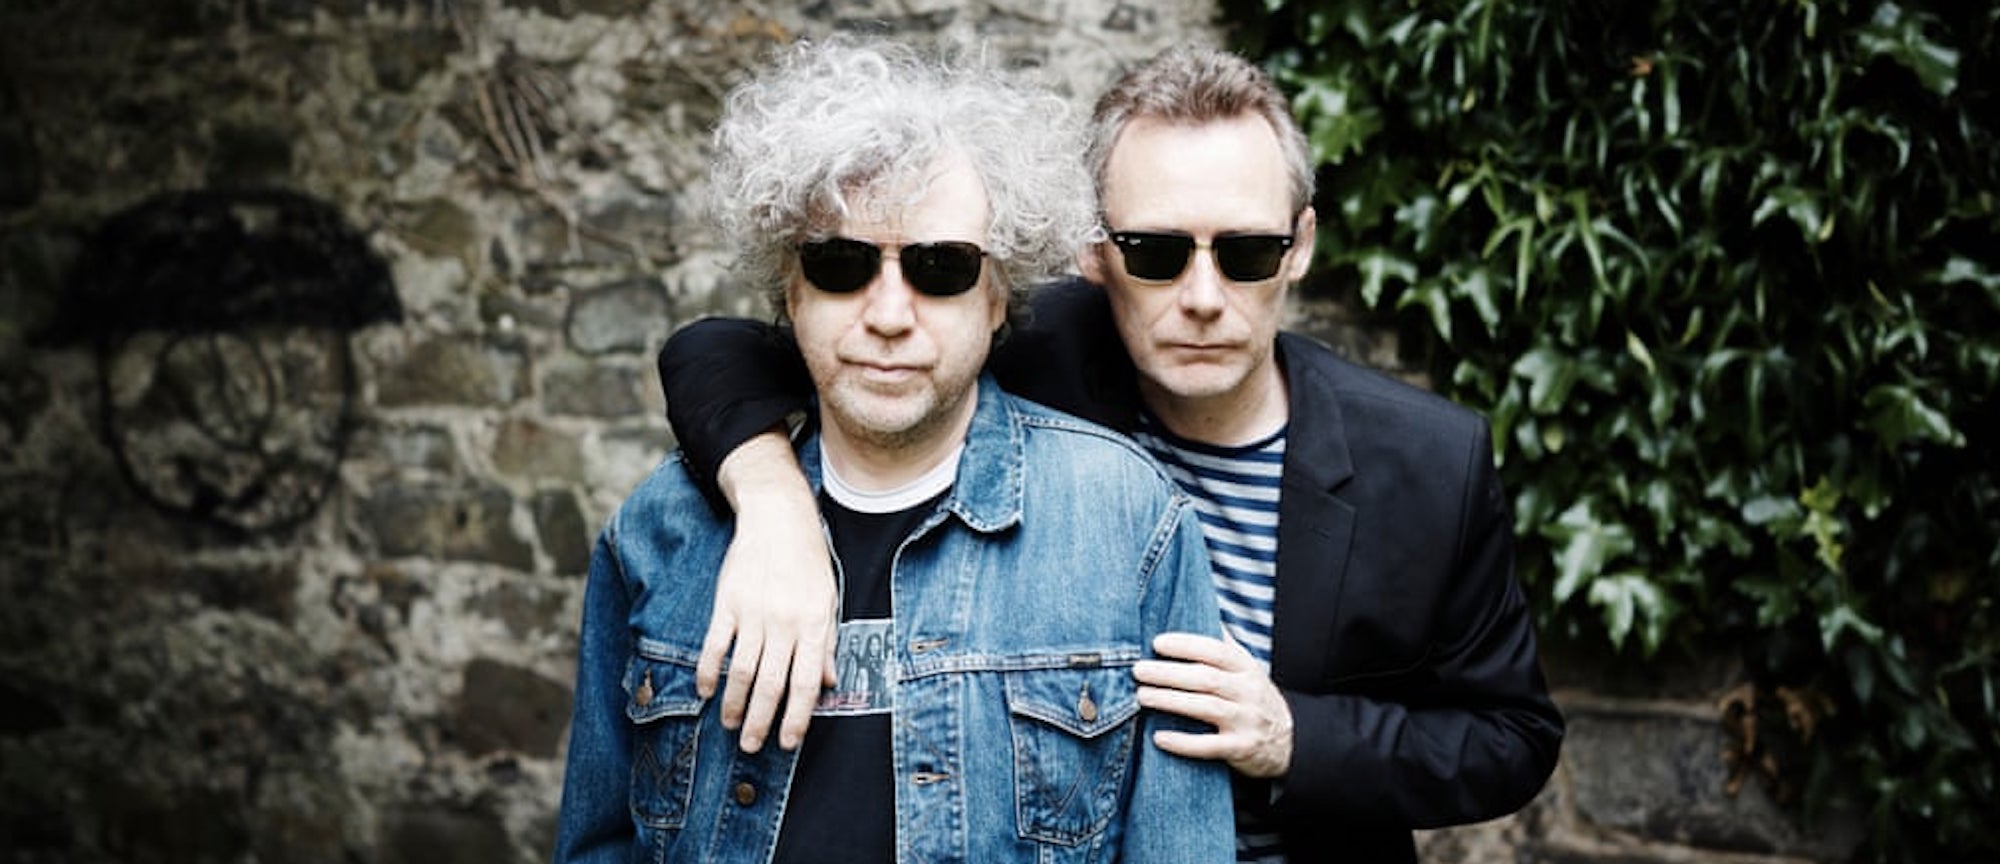 The Jesus and Mary Chain Sue Warner Music Over Copyright Infringement